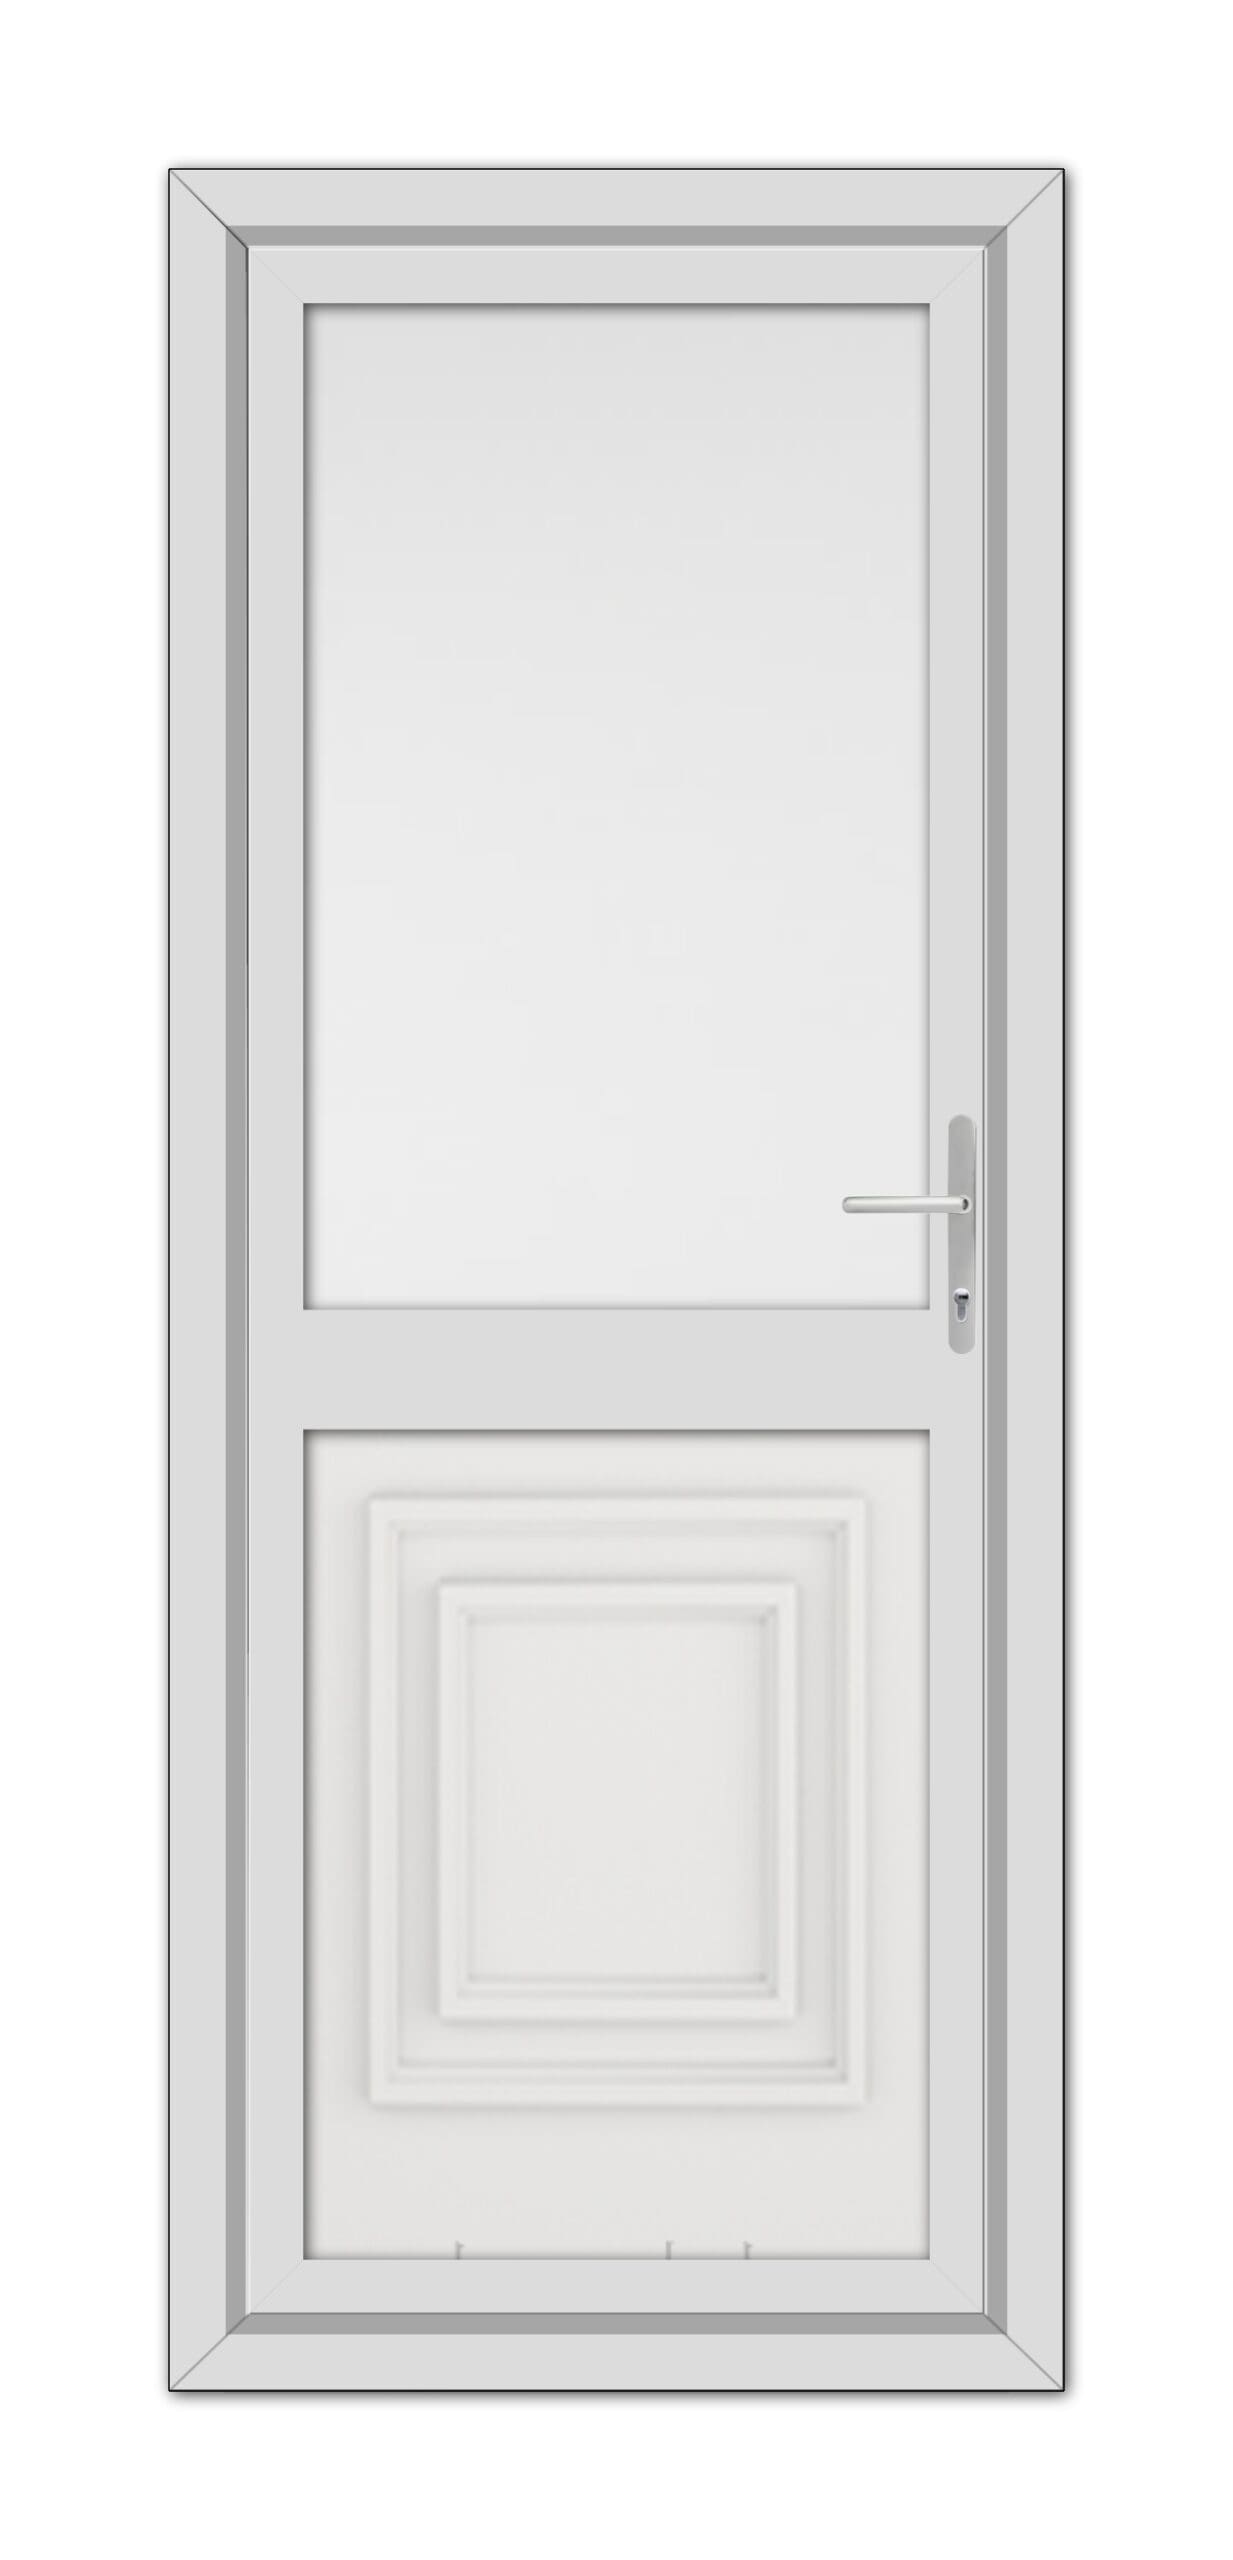 A closed White Hannover Half uPVC Back Door with a window on the upper half and a decorative square panel on the lower half, featuring a modern handle on the right side.